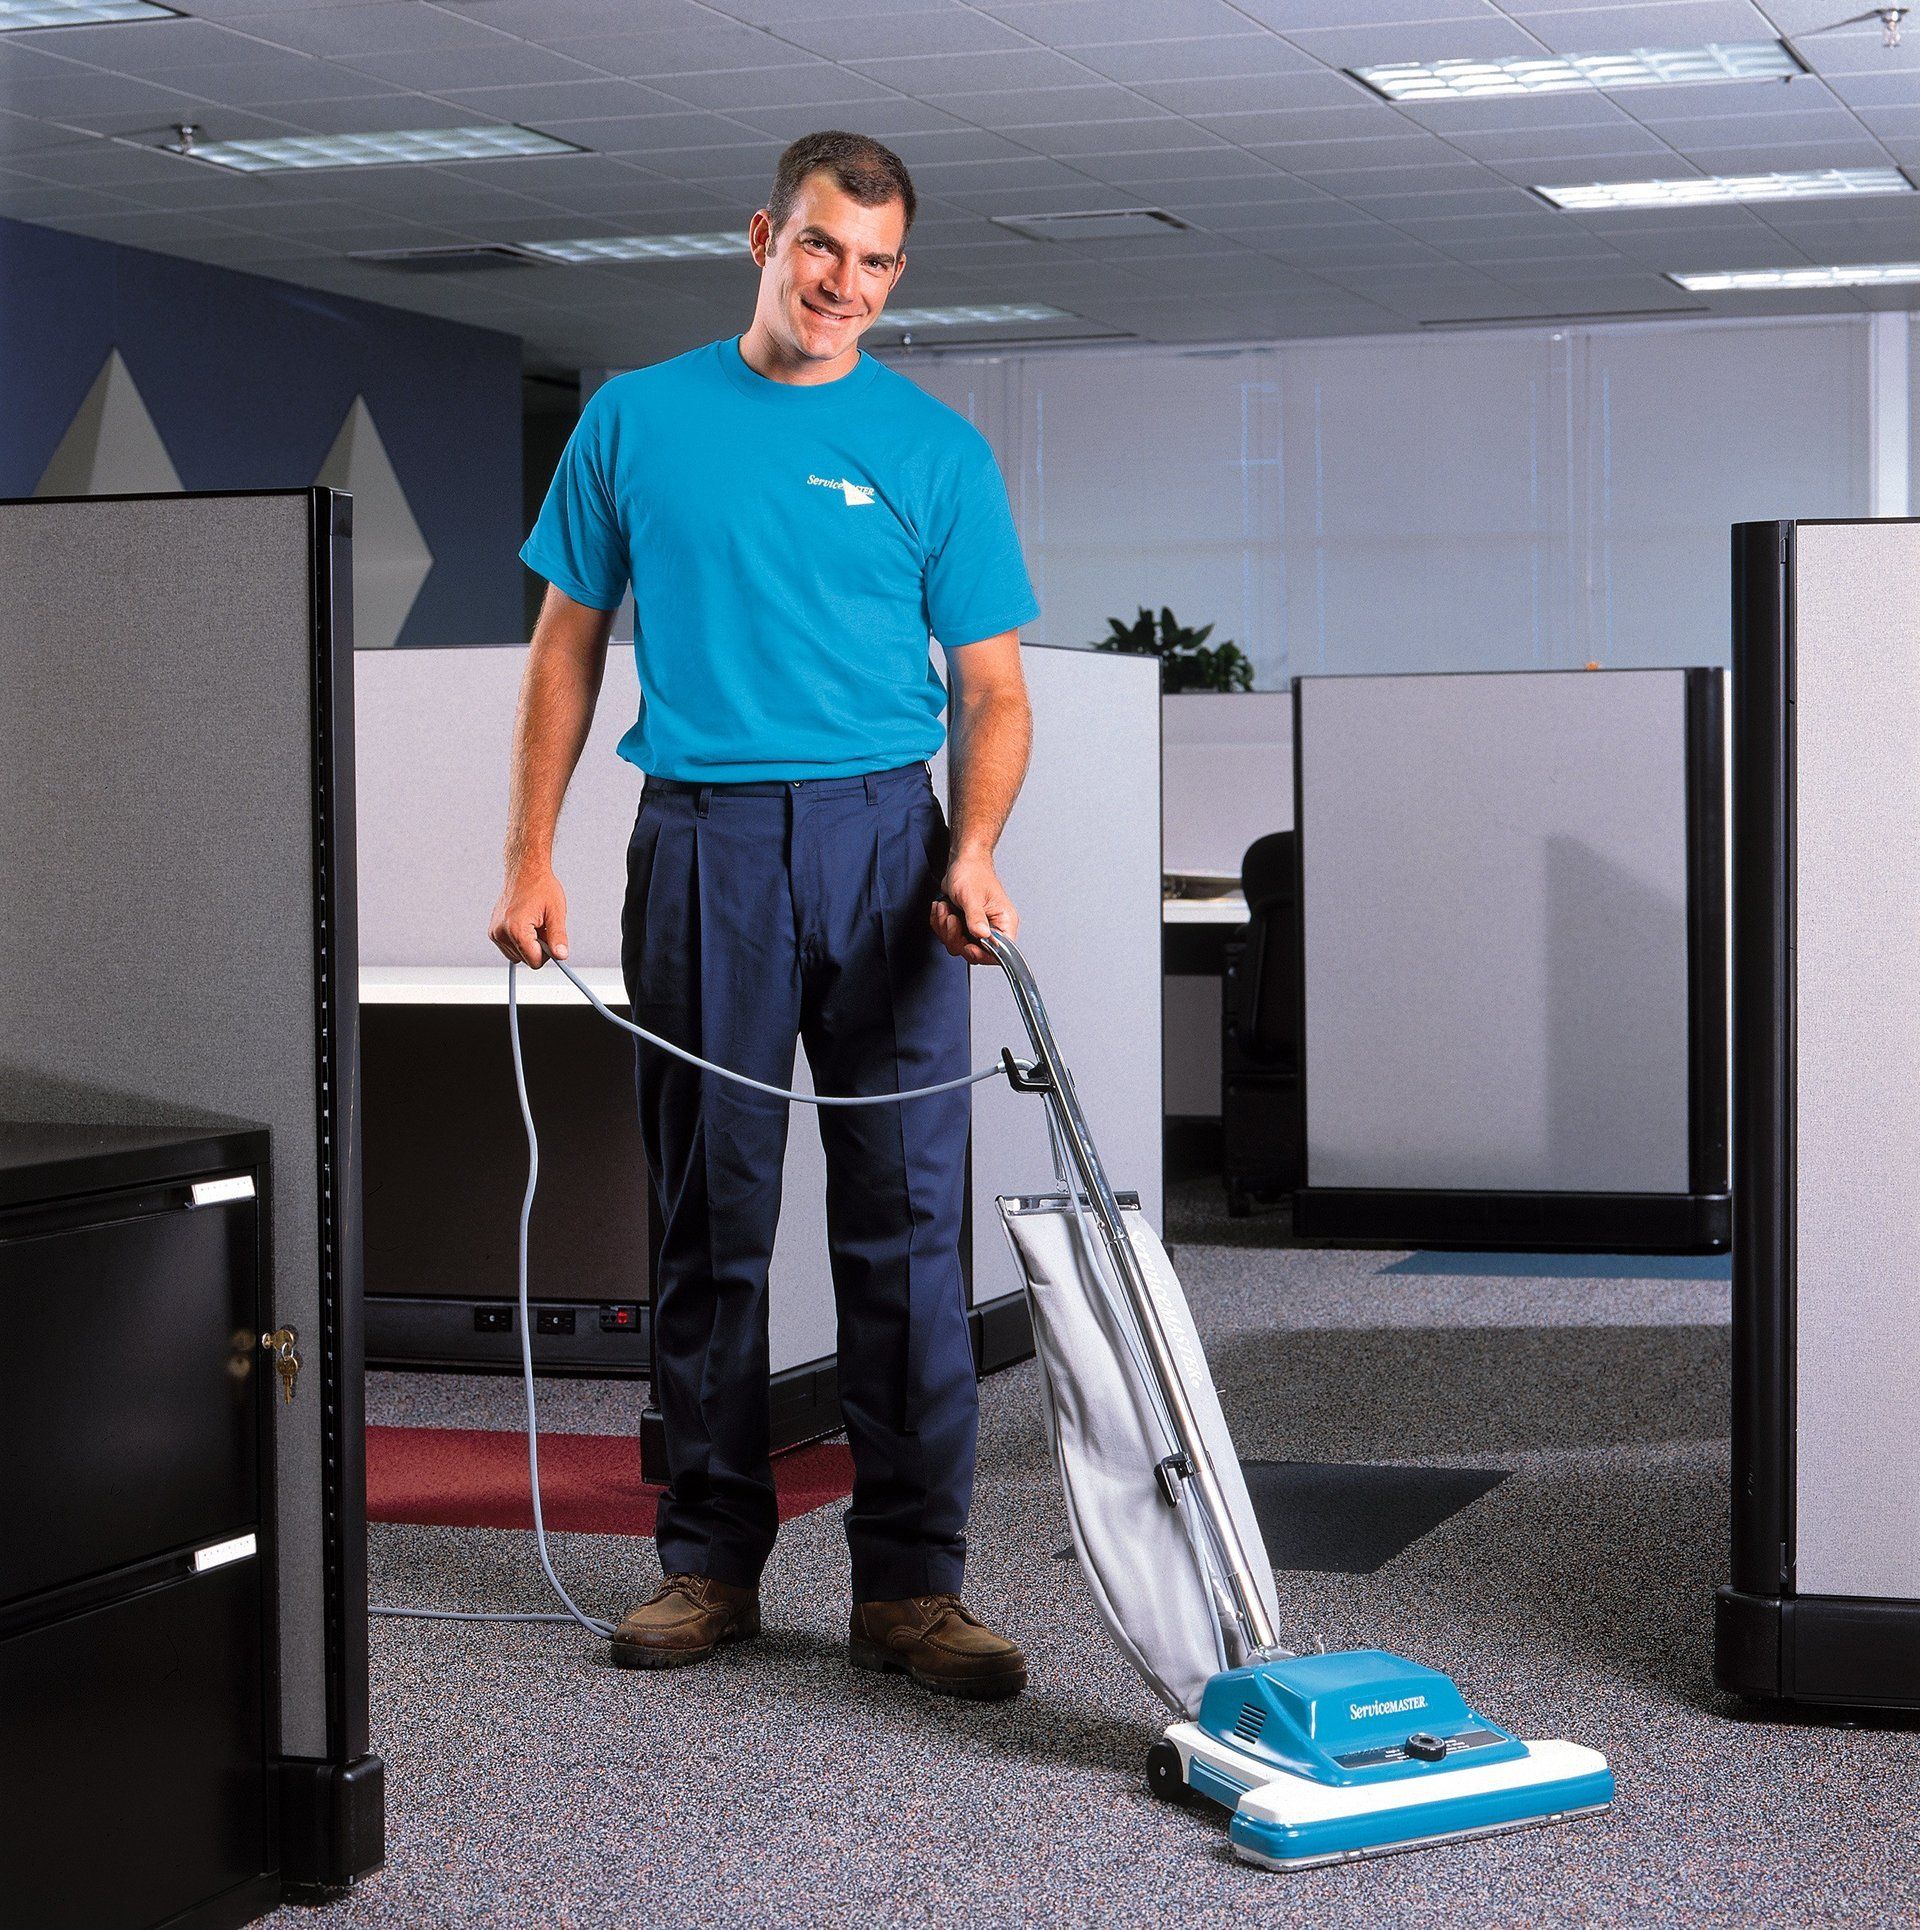 Commercial Carpet Cleaning by ServiceMaster Elite and ServiceMaster of the Northland